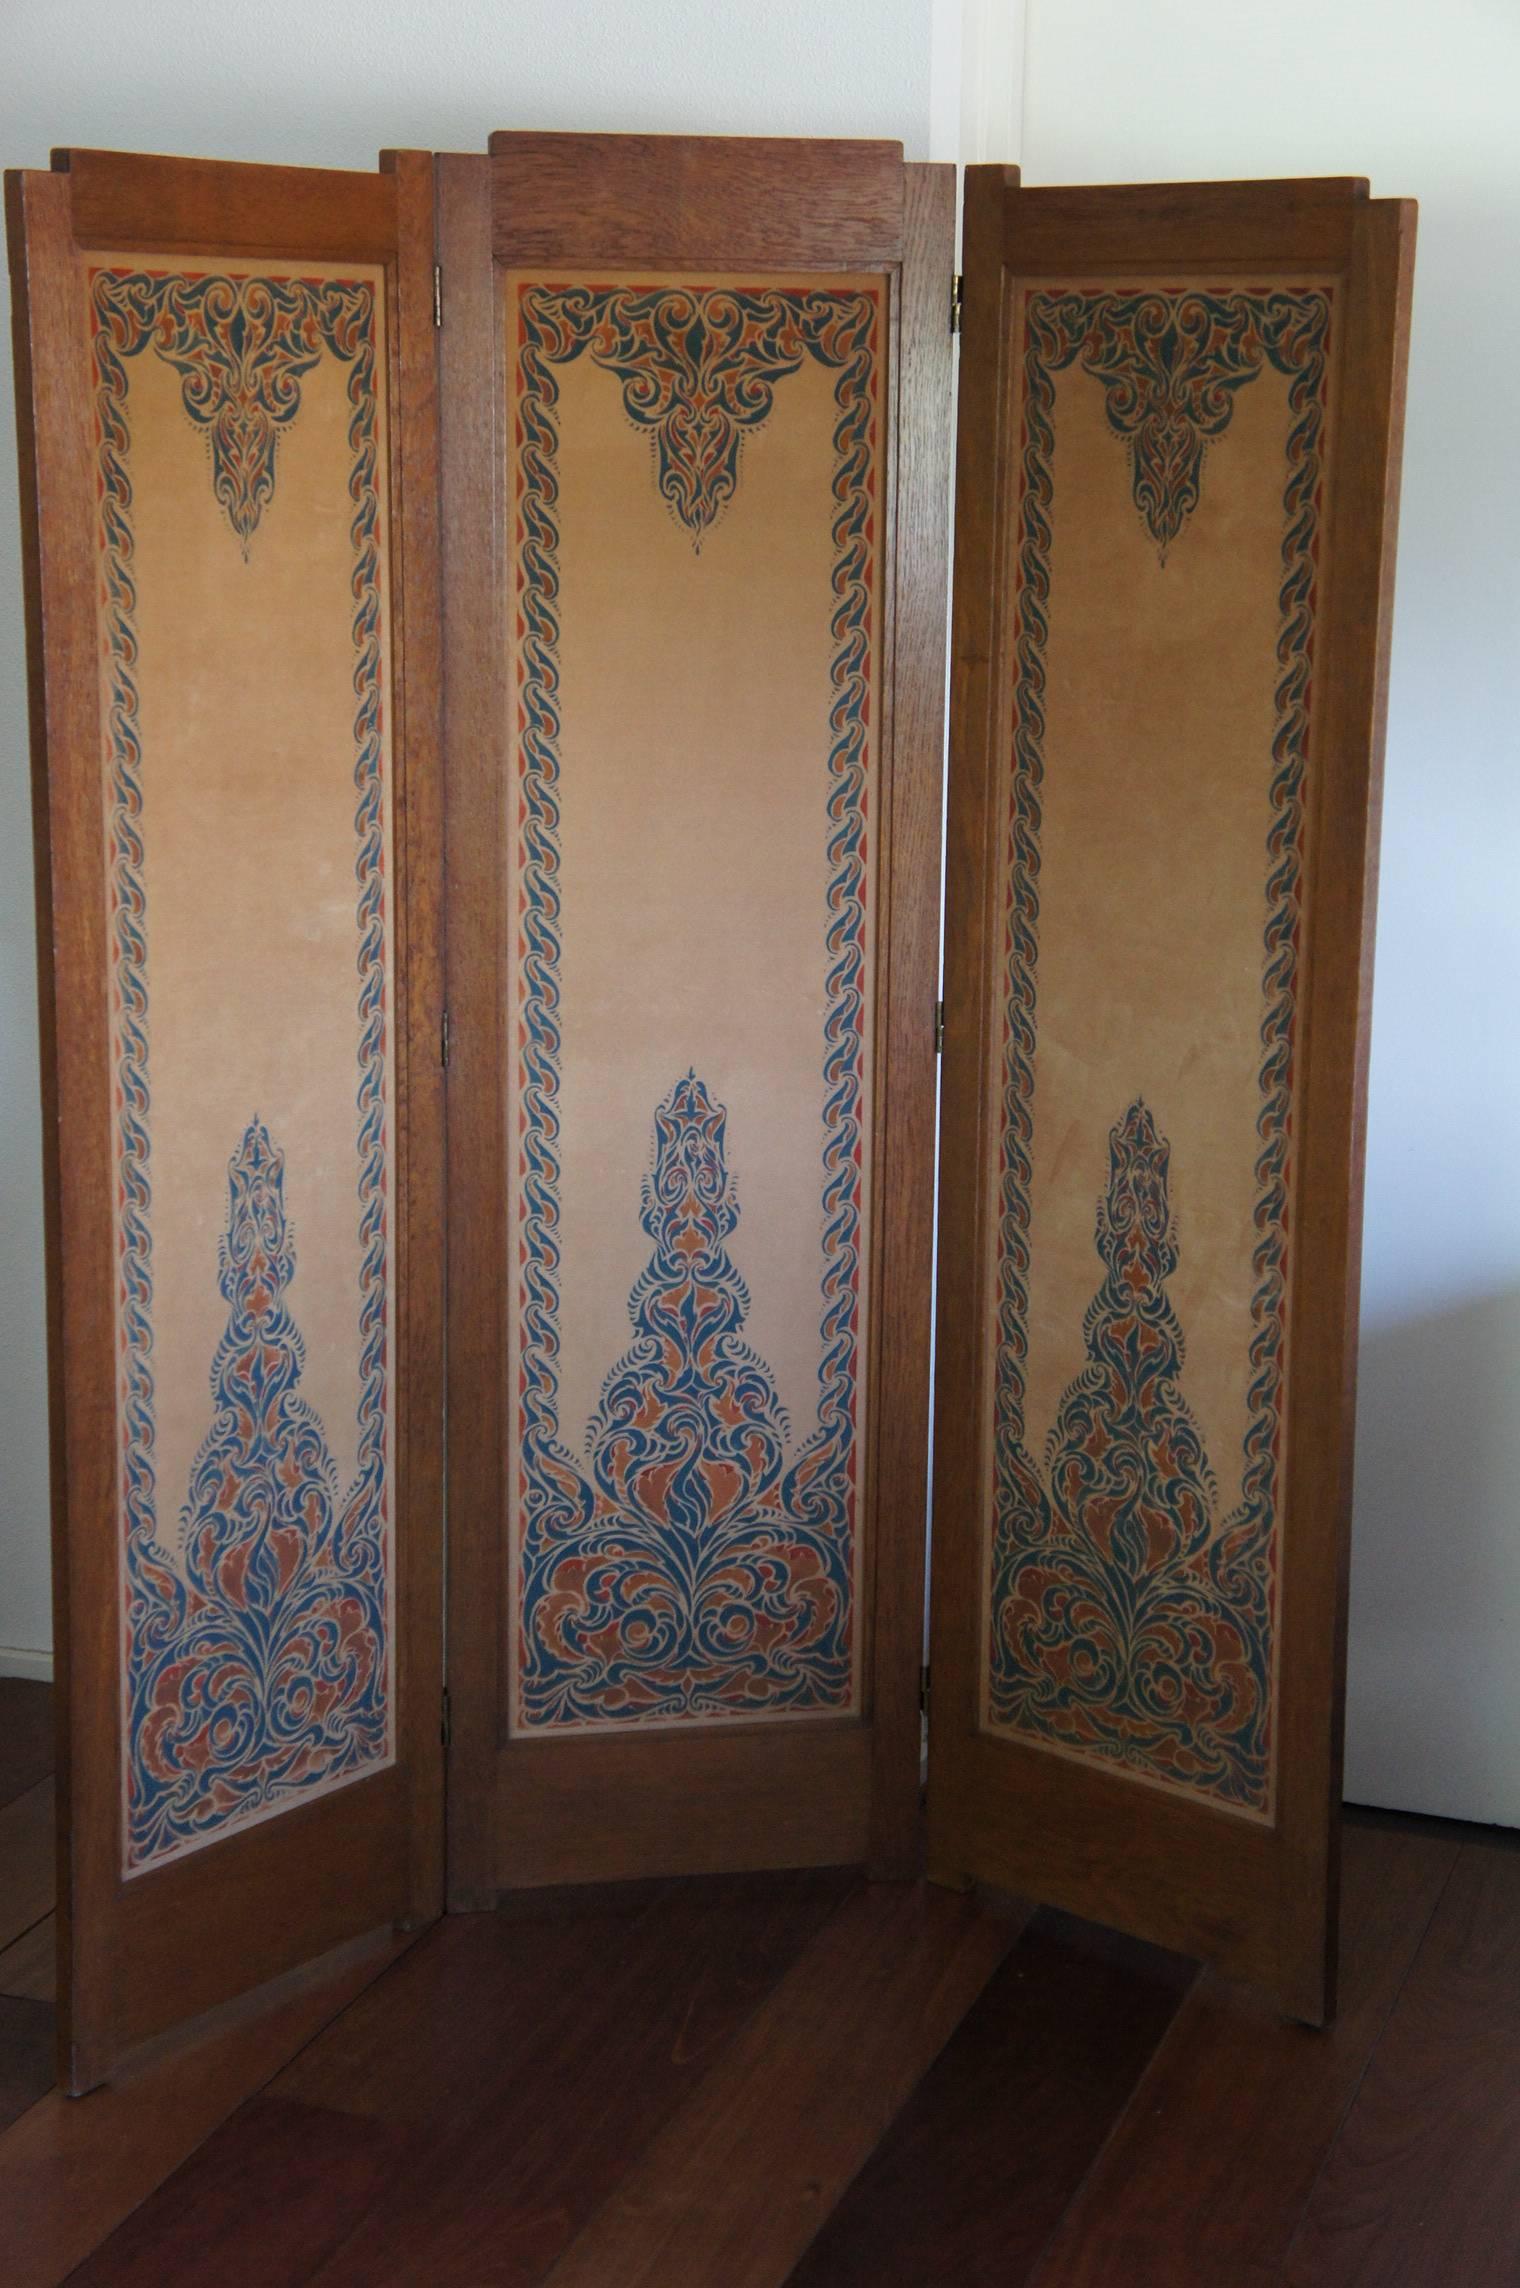 Dutch Arts and Crafts Folding Screen with Batik Printed Felt on Wooden Panels 2